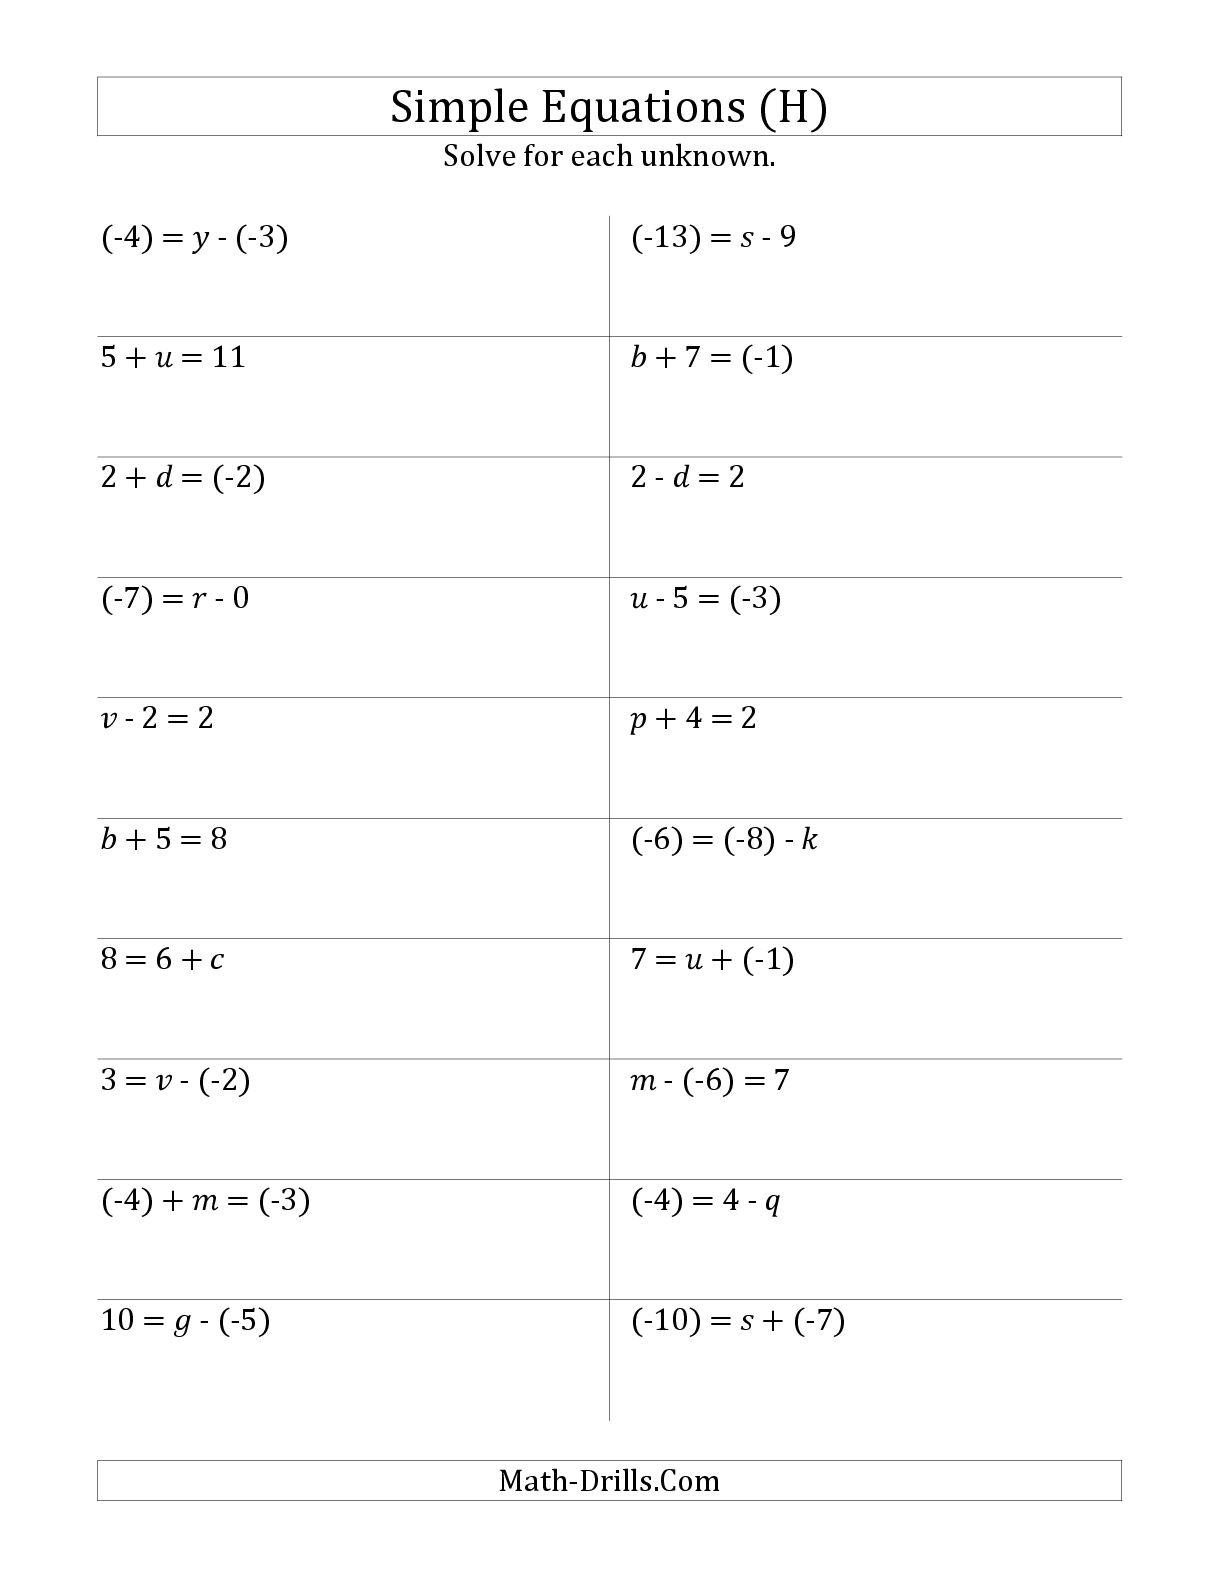 Solving Linear Equations Printable Worksheets Image